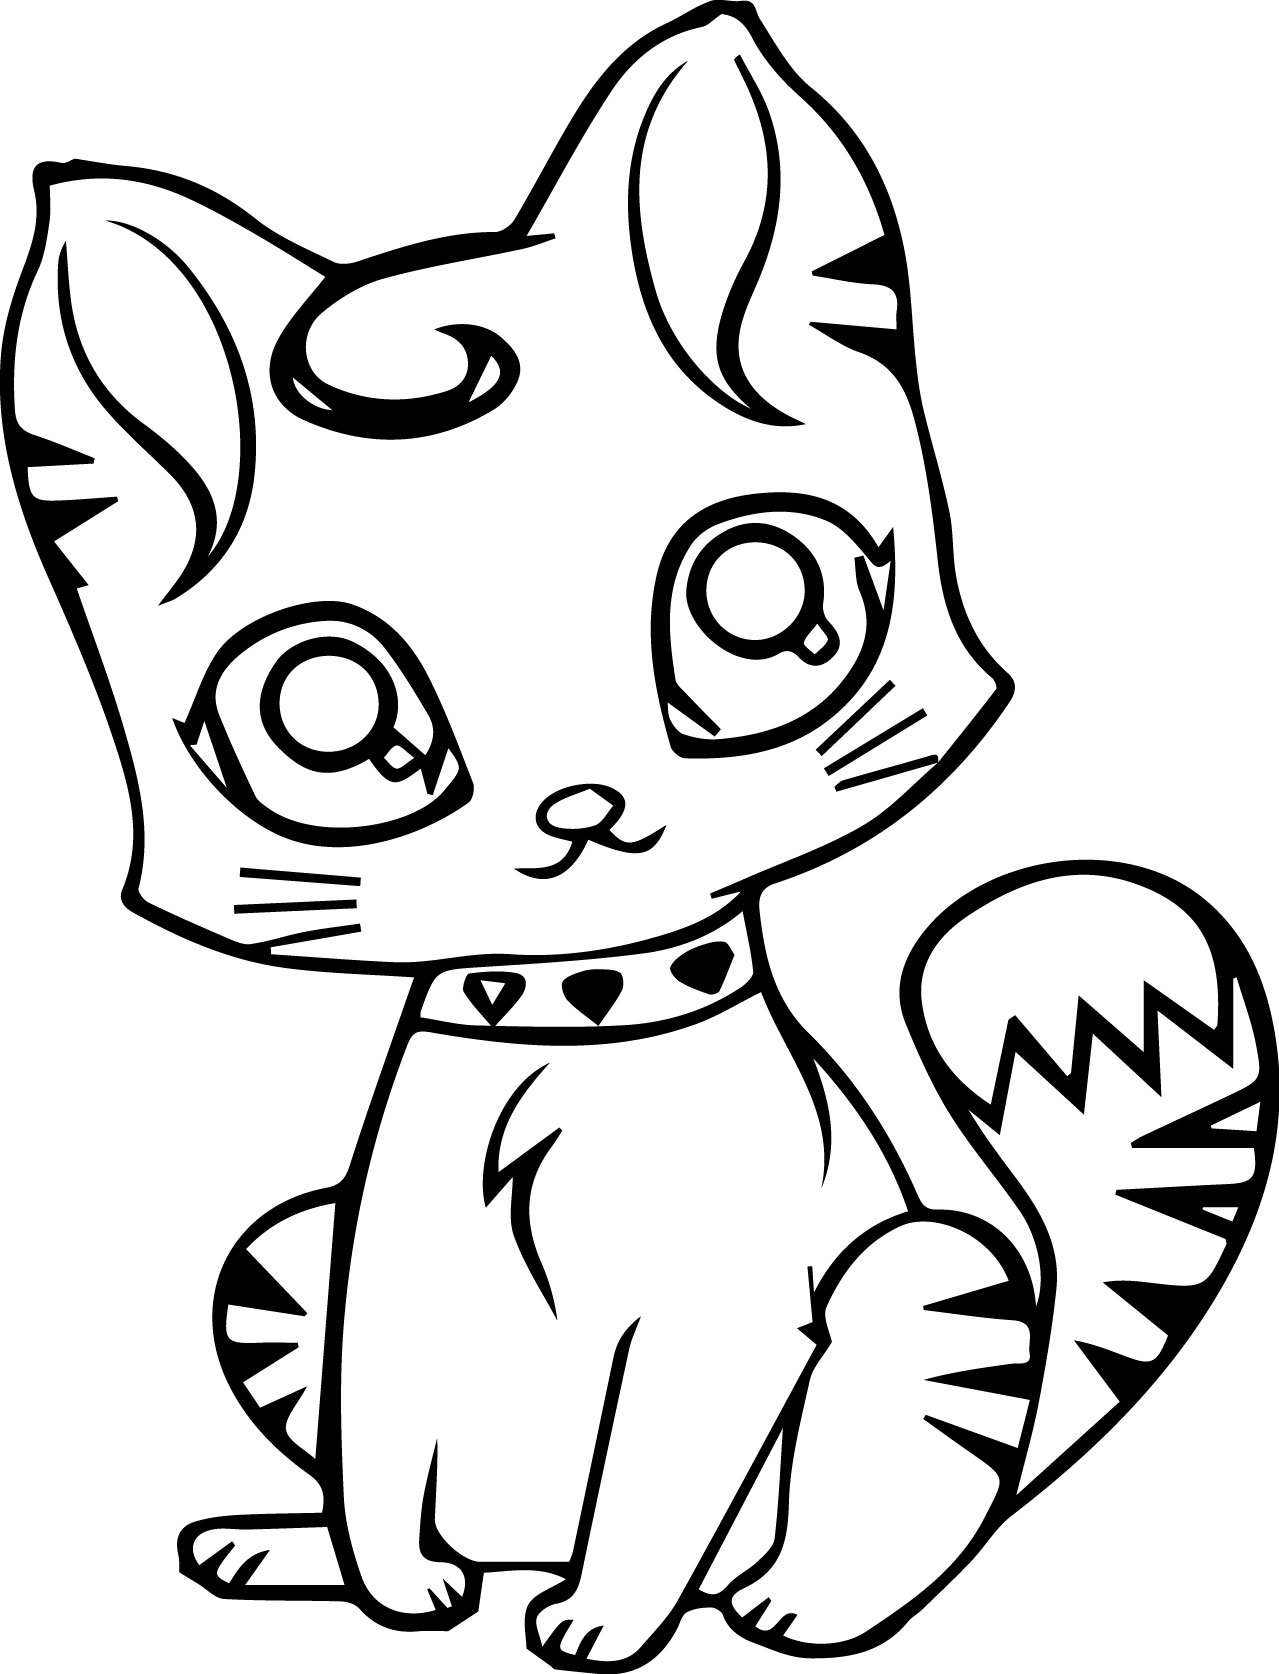 Coloring Pages Cute Cats at GetColorings.com | Free ...